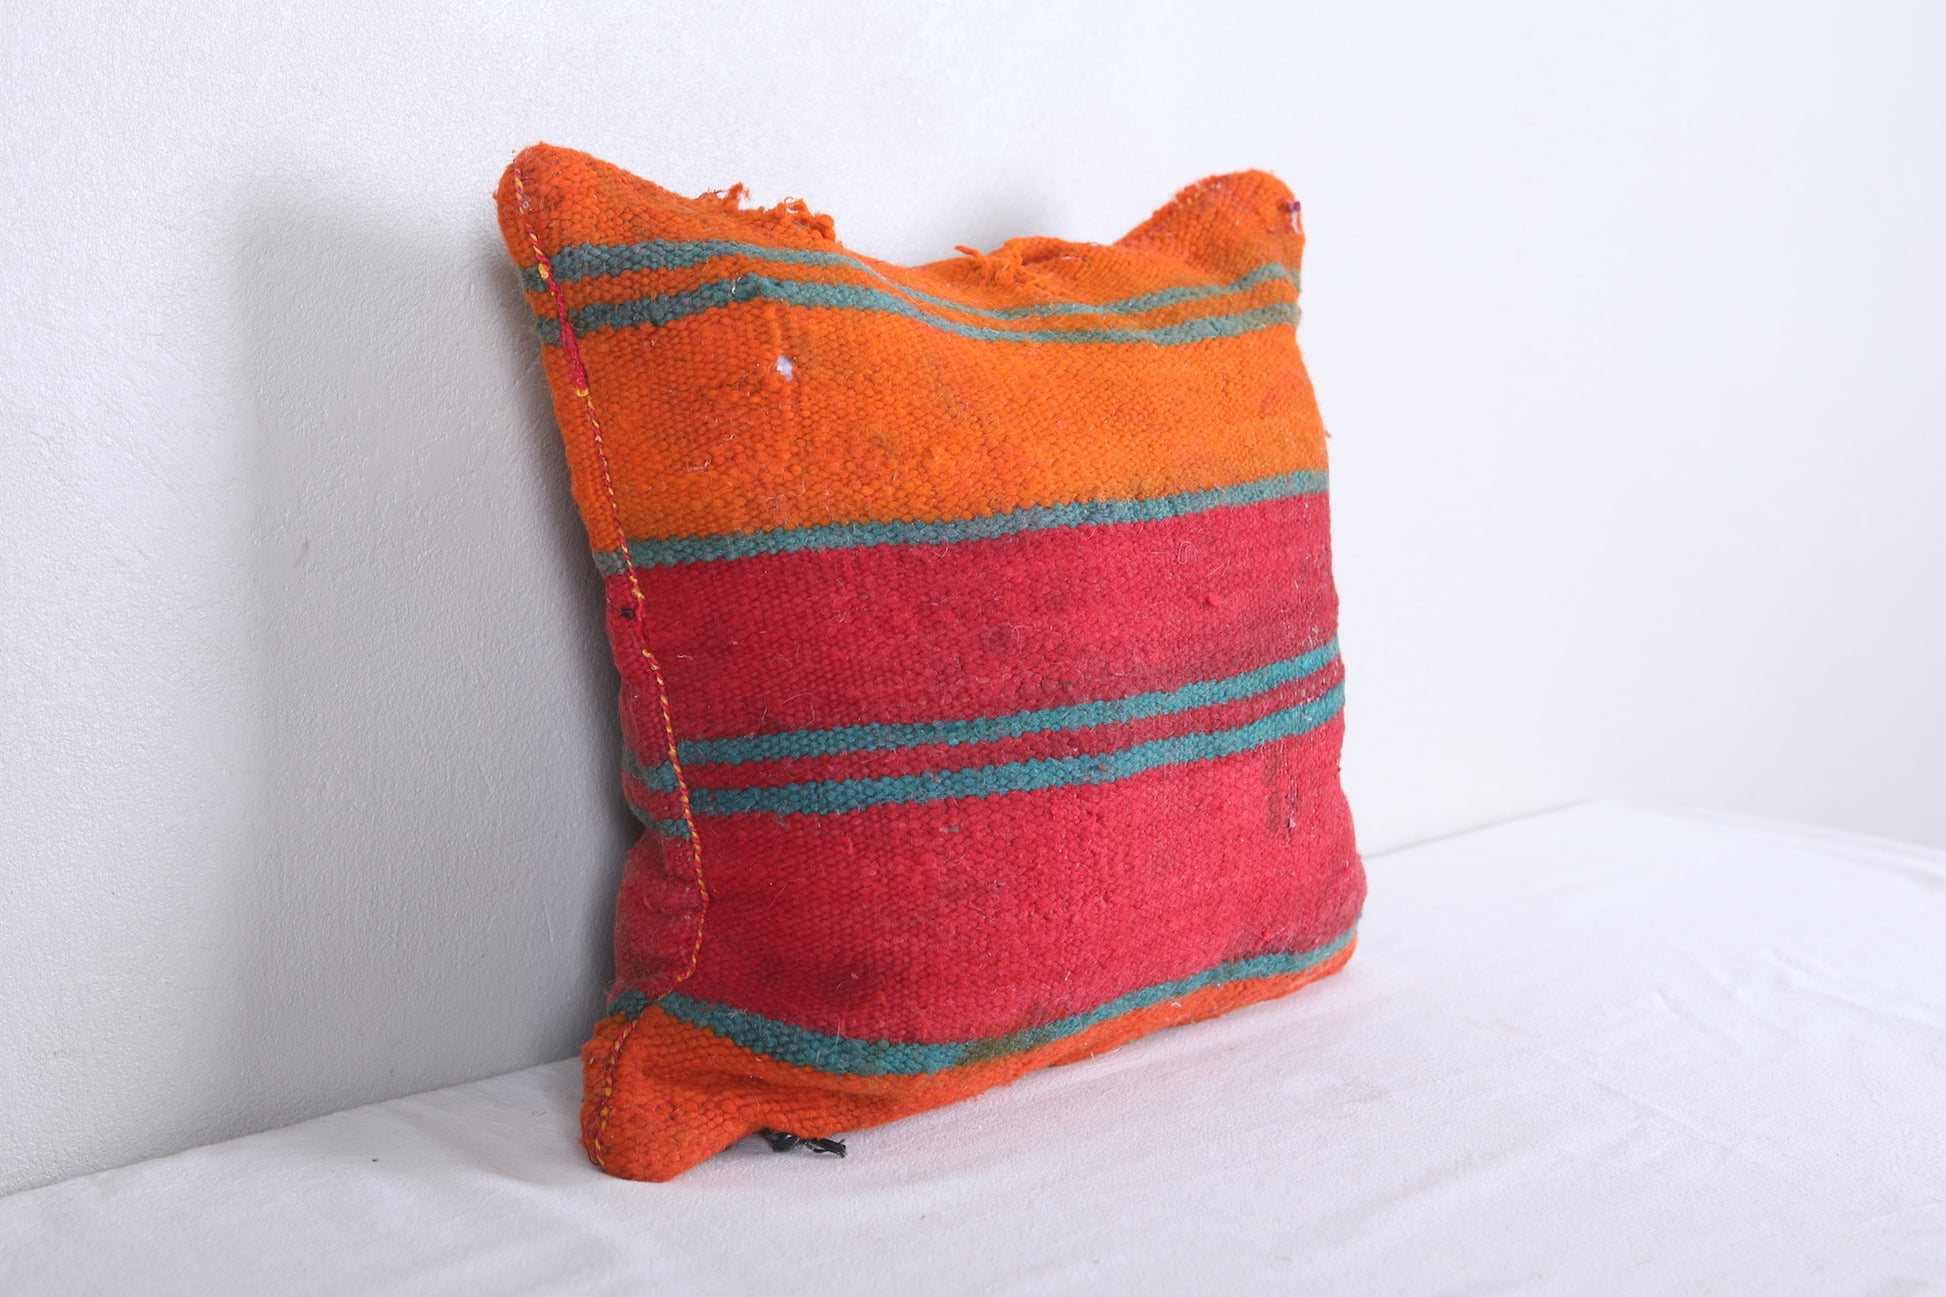 Vintage handmade moroccan kilim pillow 15.7 INCHES X 16.5 INCHES